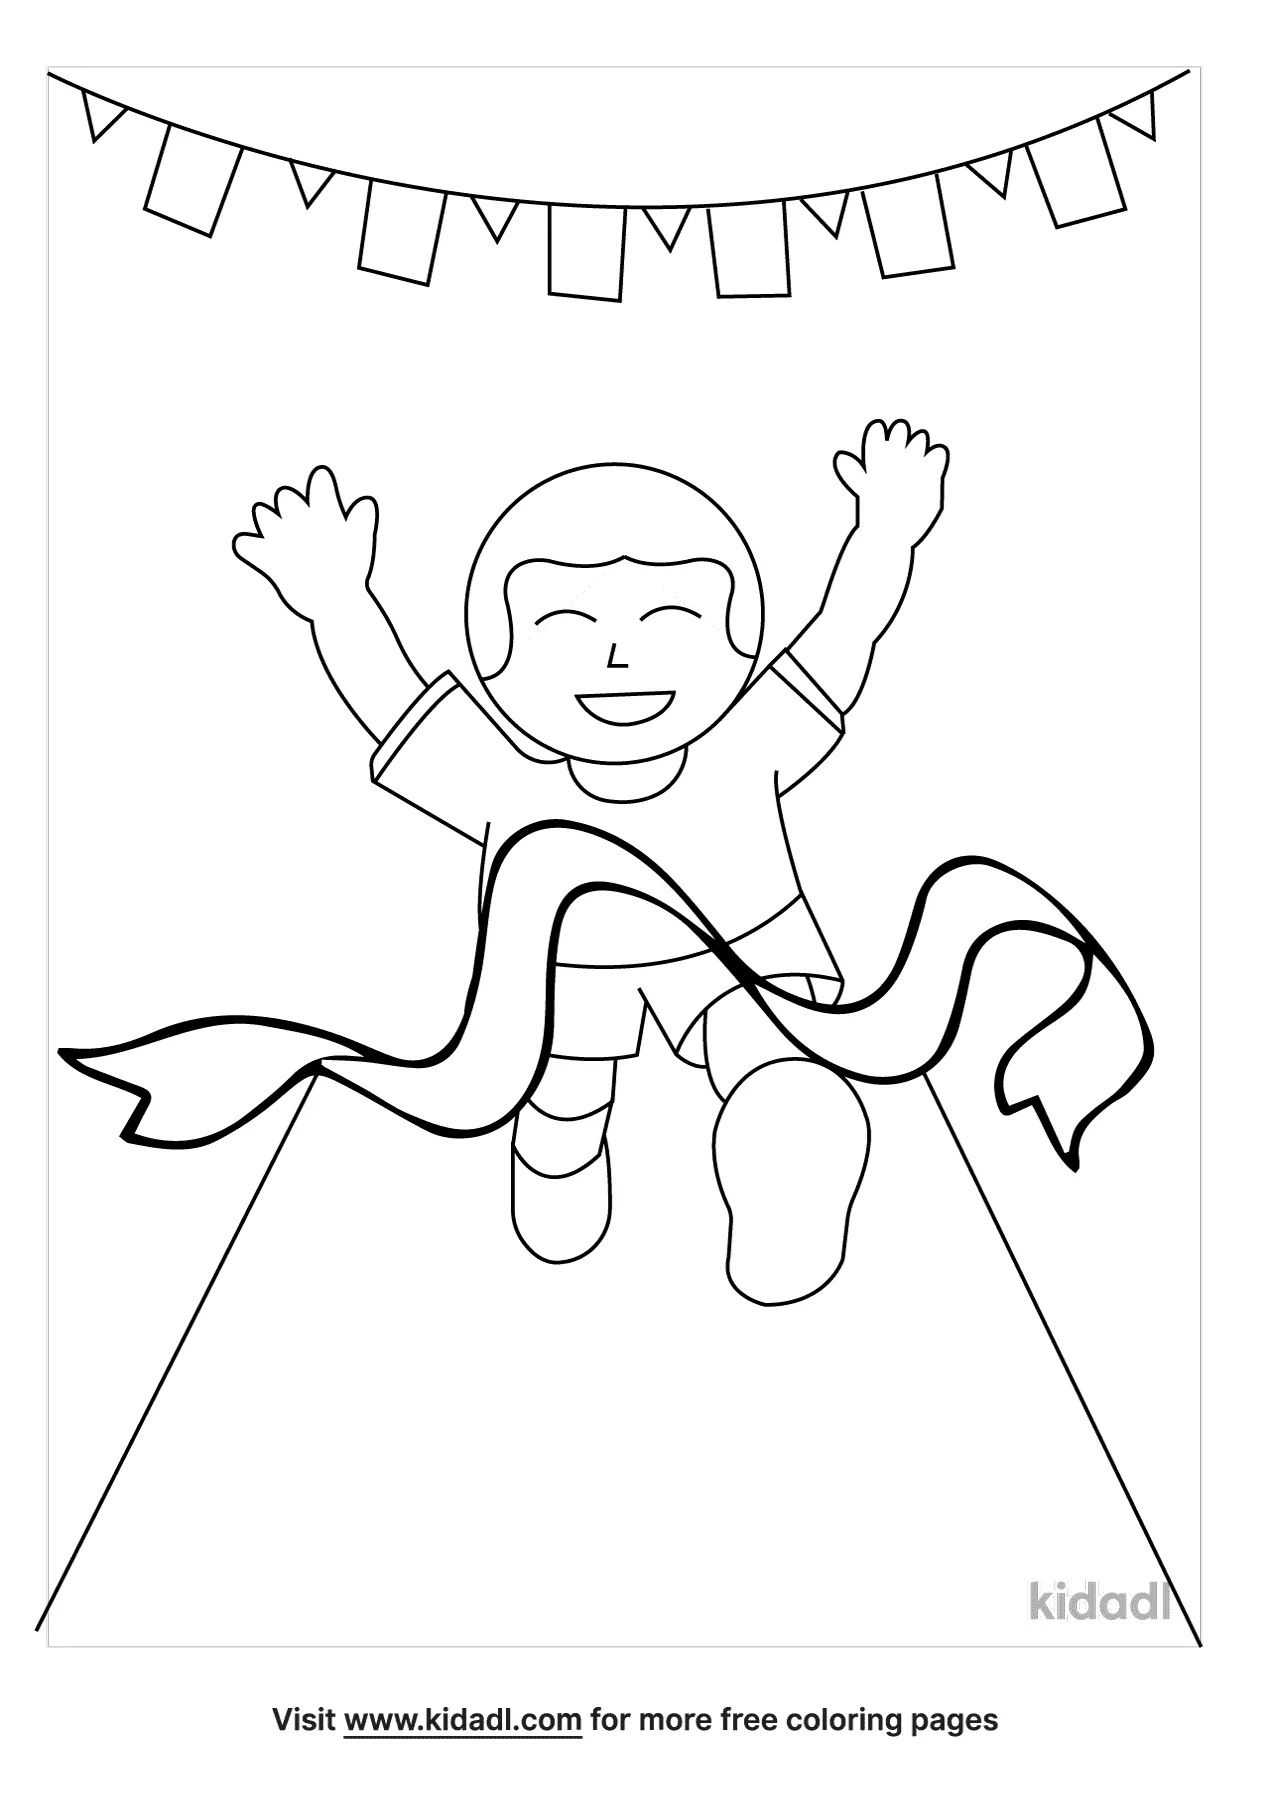 Win Race Coloring Page